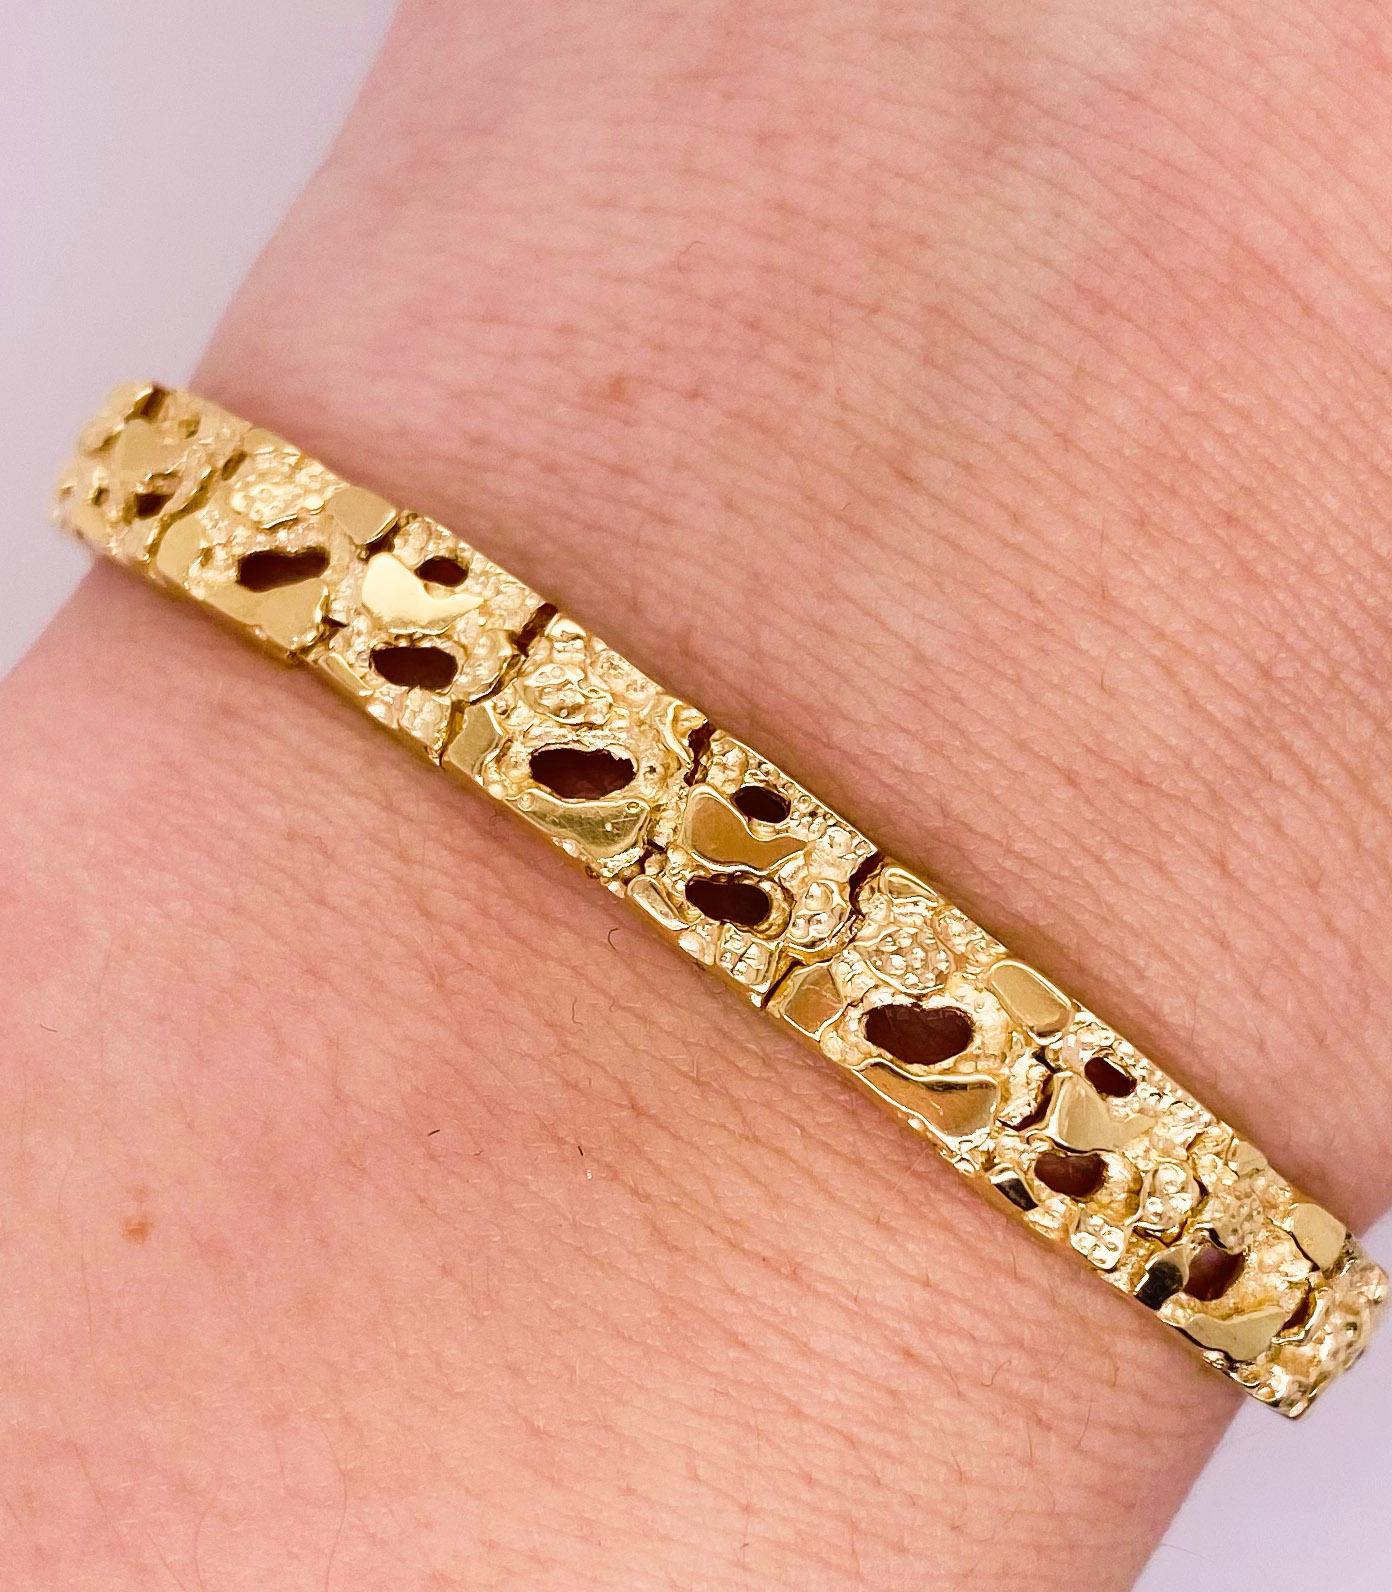 This retro 14k yellow gold nugget bracelet matches everything! It is the perfect mix of bold and understated, and would make a wonderful addition to any outfit, casual or formal. This bracelet would make the perfect gift for your loved one or